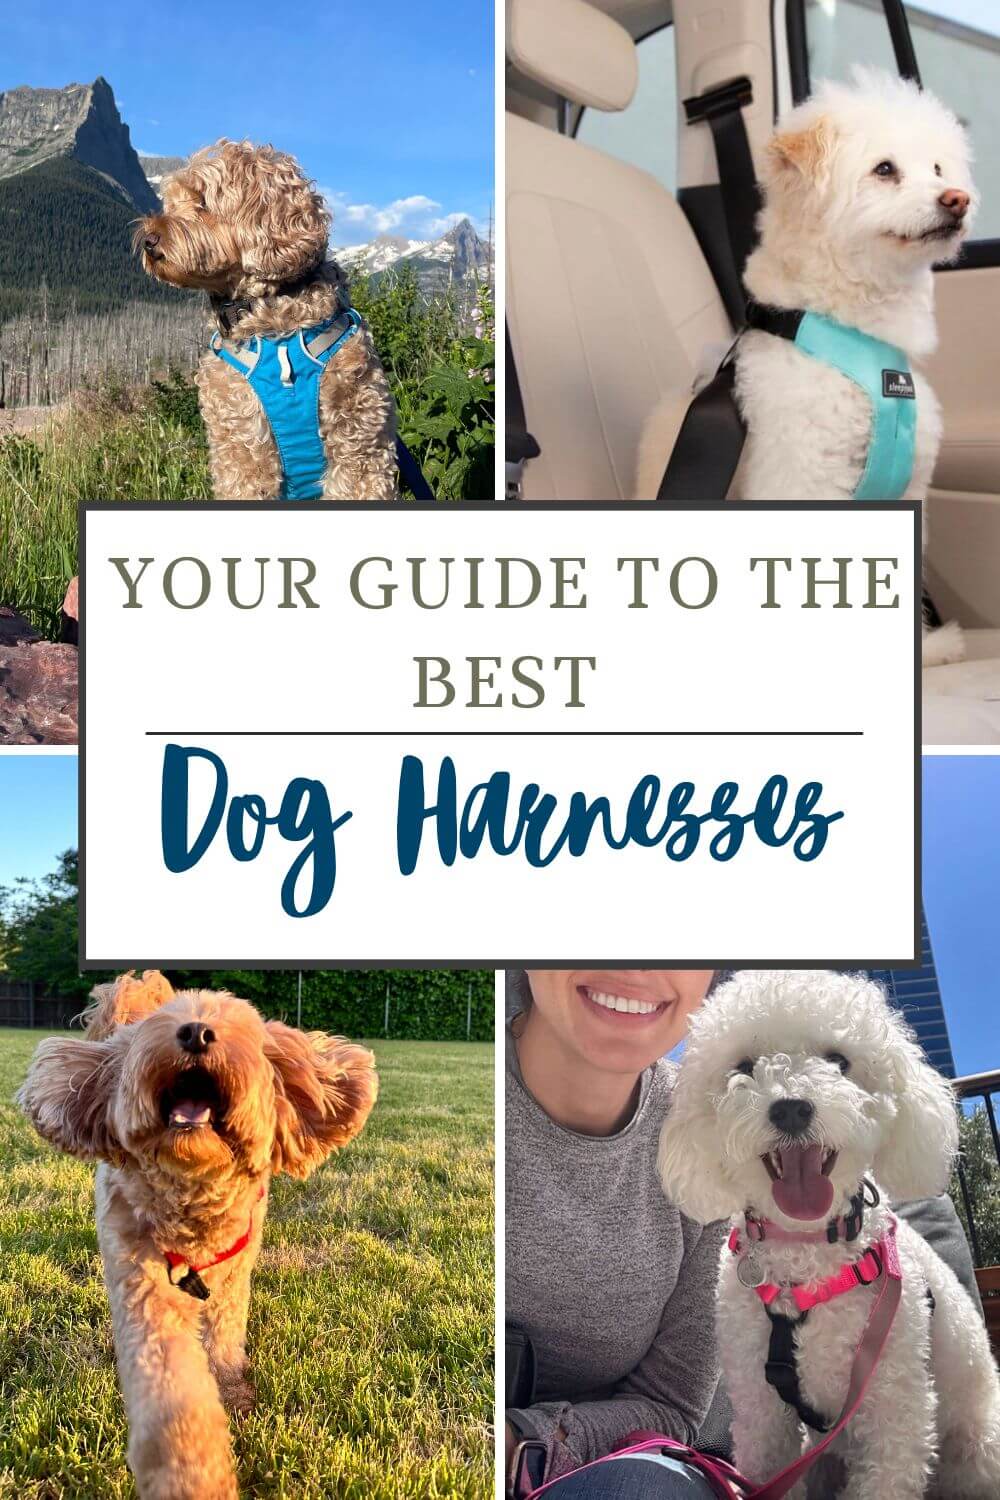 The best dog harness for your dog